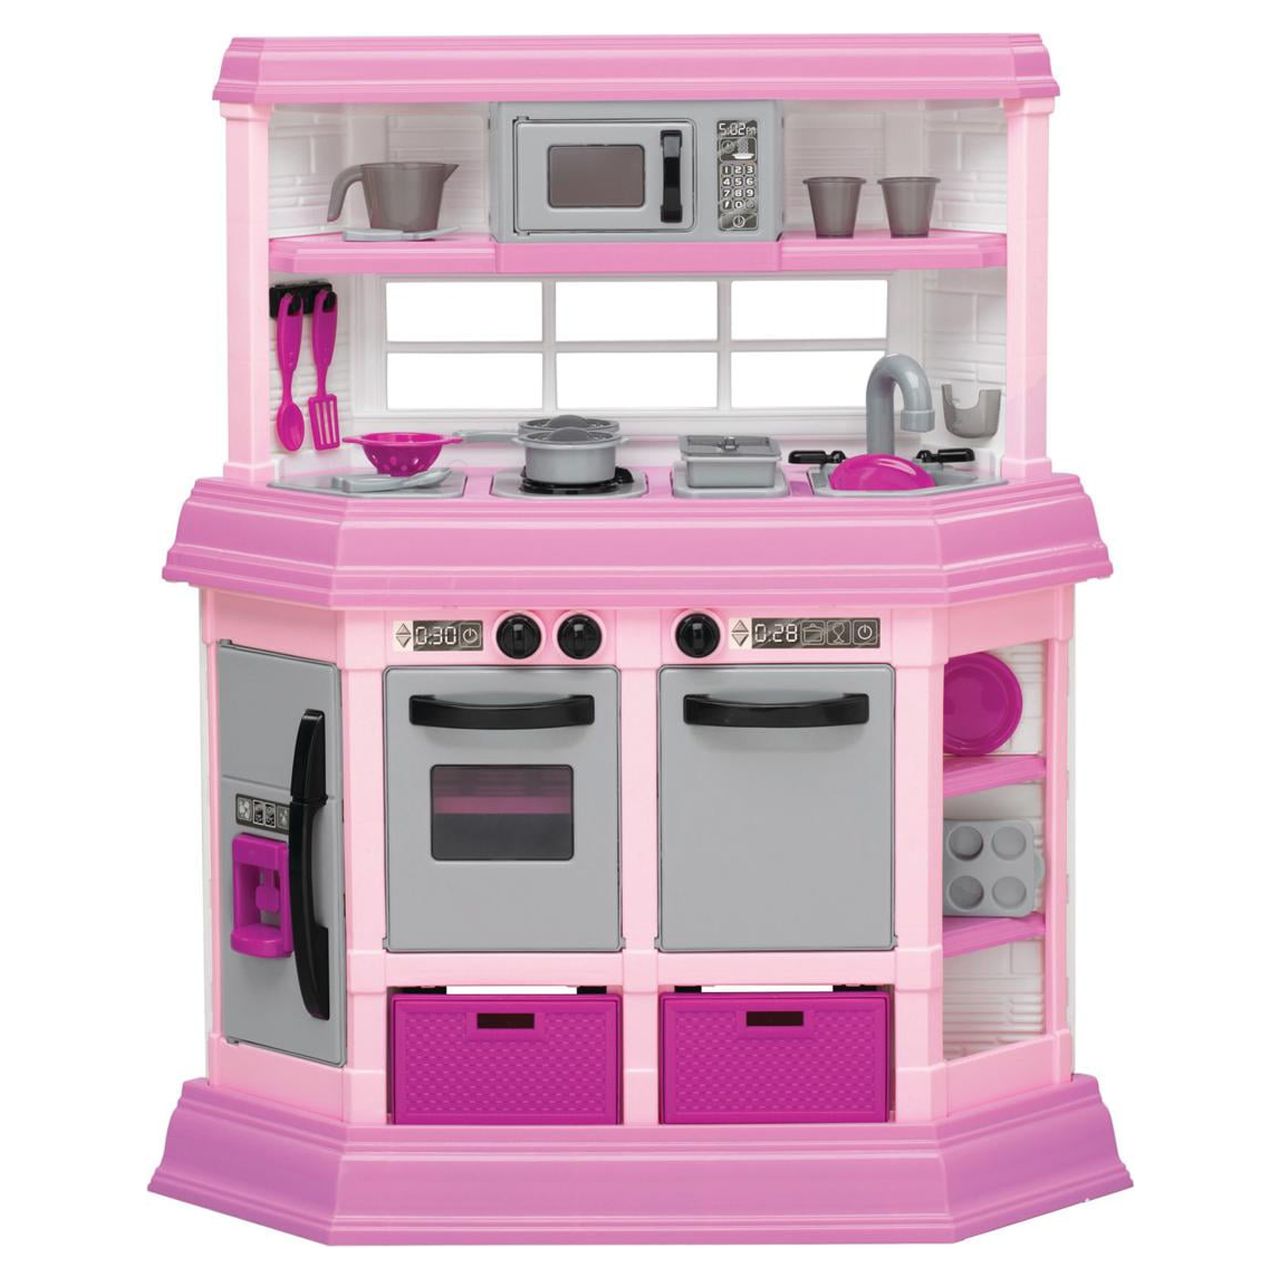 American Plastic Toys Kids Deluxe Custom Play Kitchen with 22 Piece Accessory Play Set - image 1 of 7